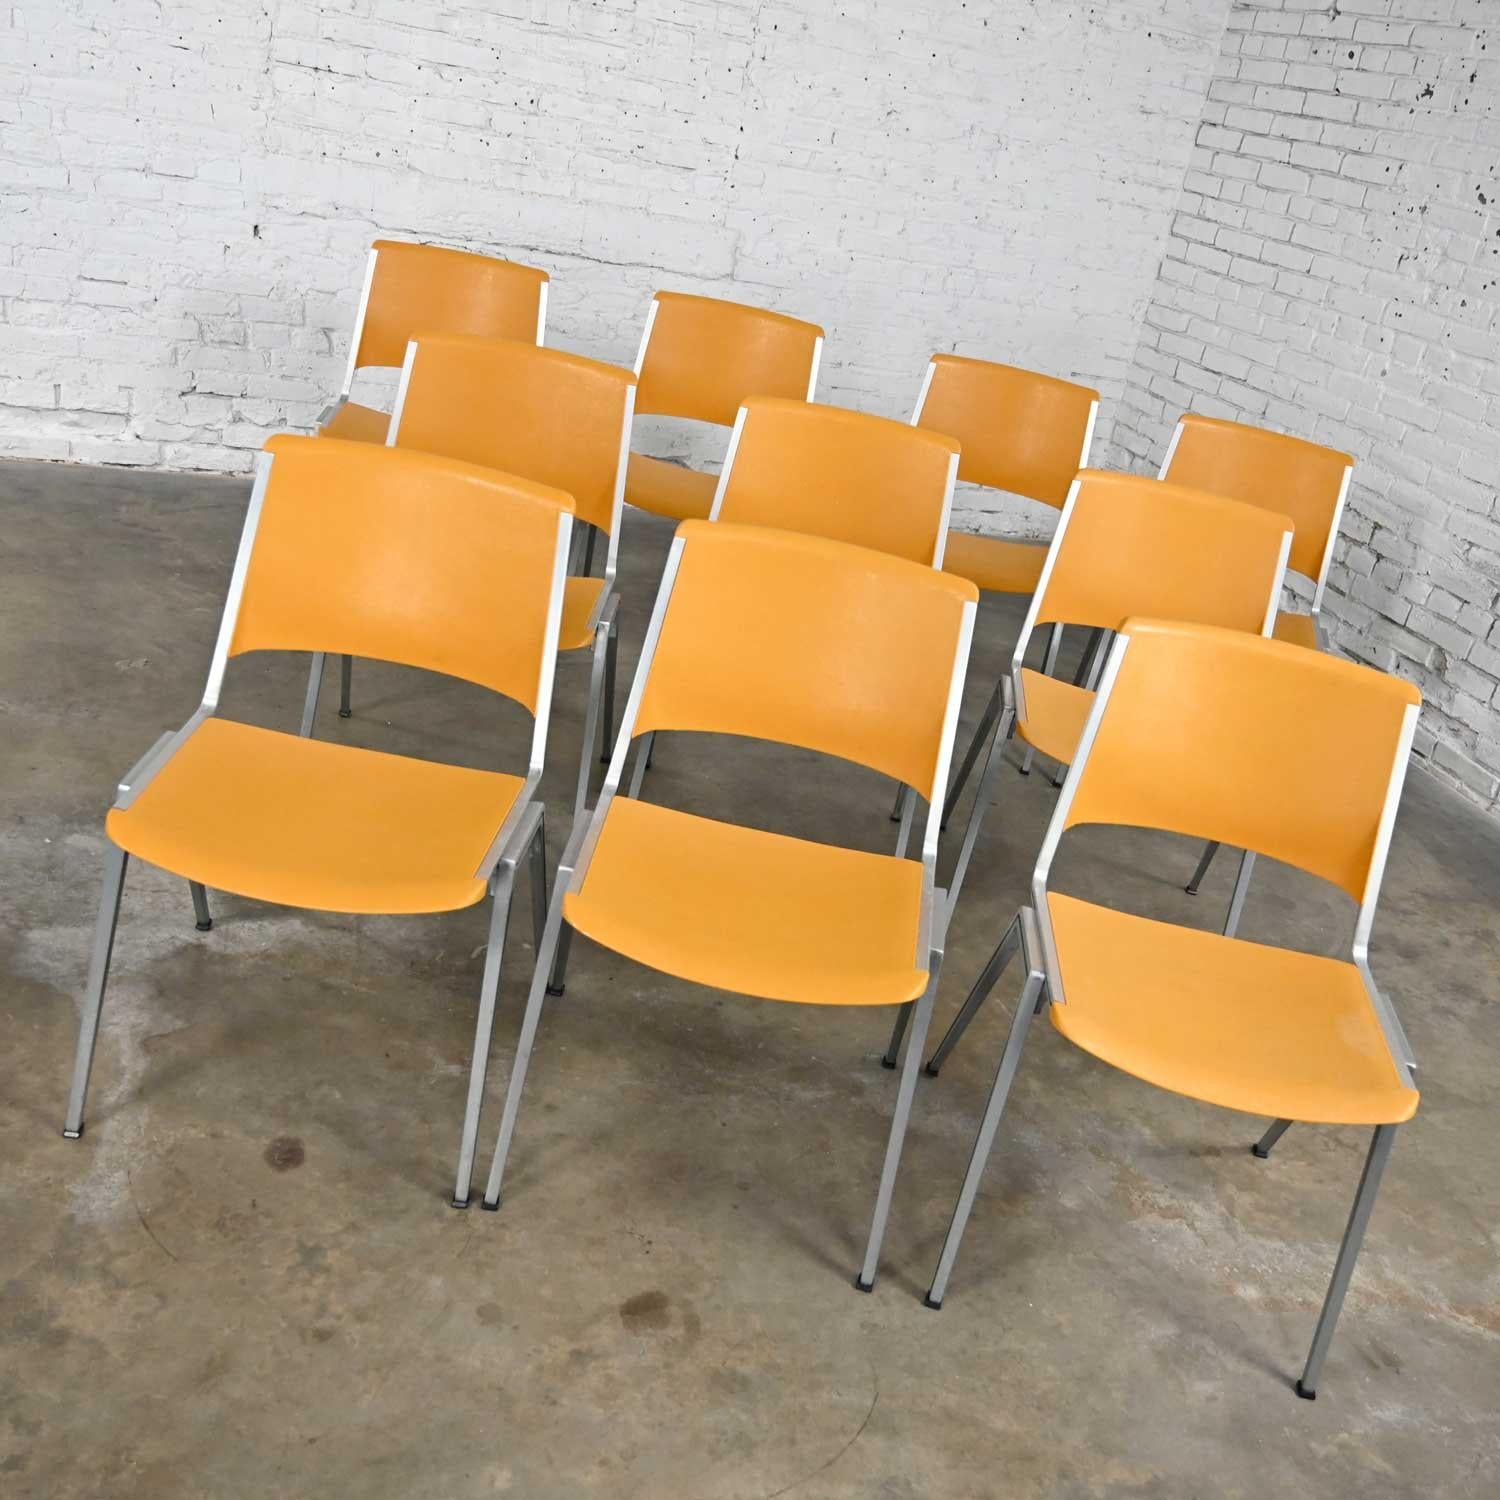 20th Century Vintage Aluminum Steelcase Stacking Chairs Model 1278 Yellow Gold Plastic Set 10